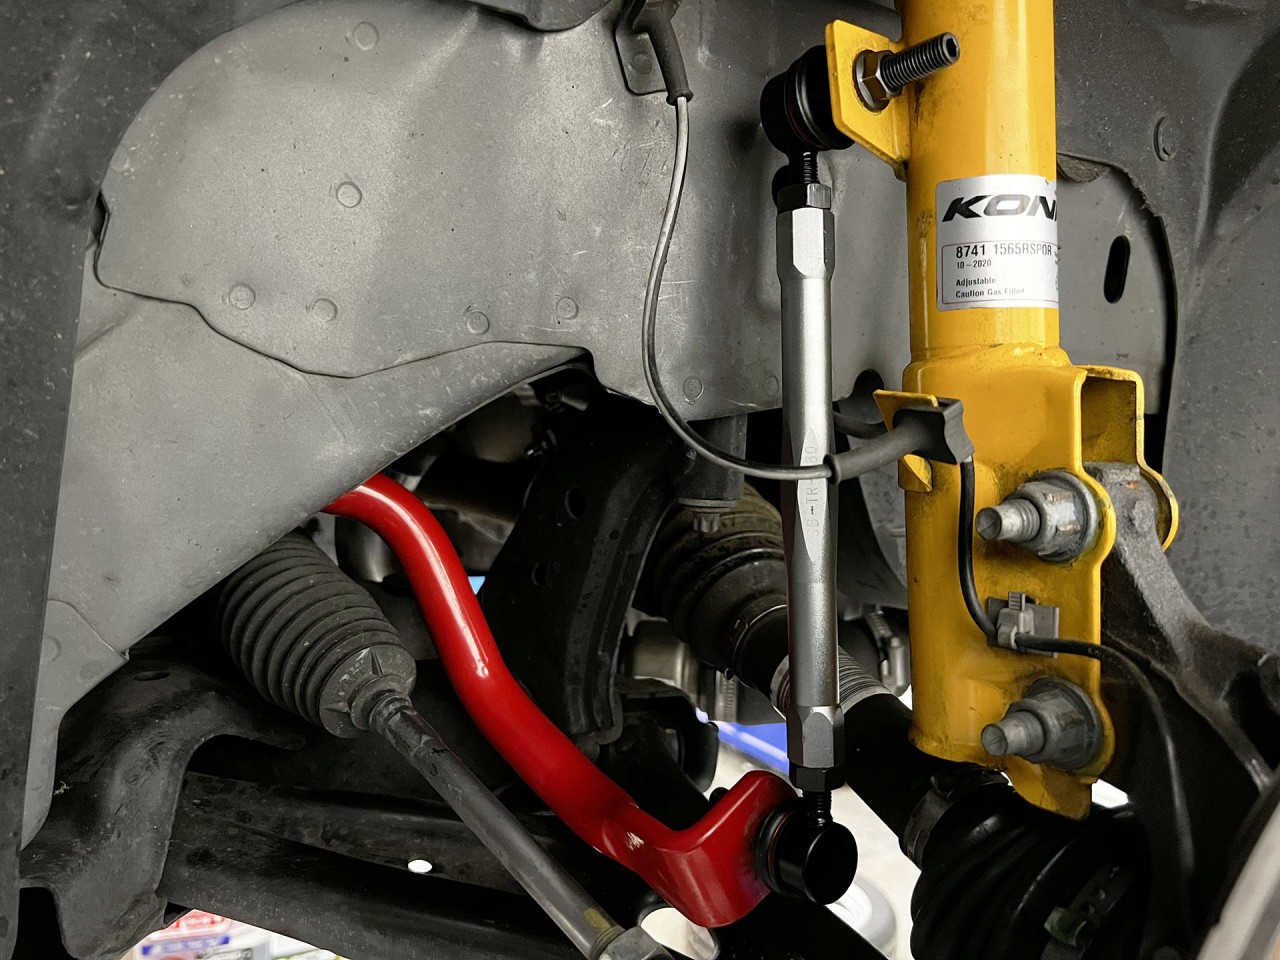 The Correct Way to Install Adjustable End Links - NASA Speed News